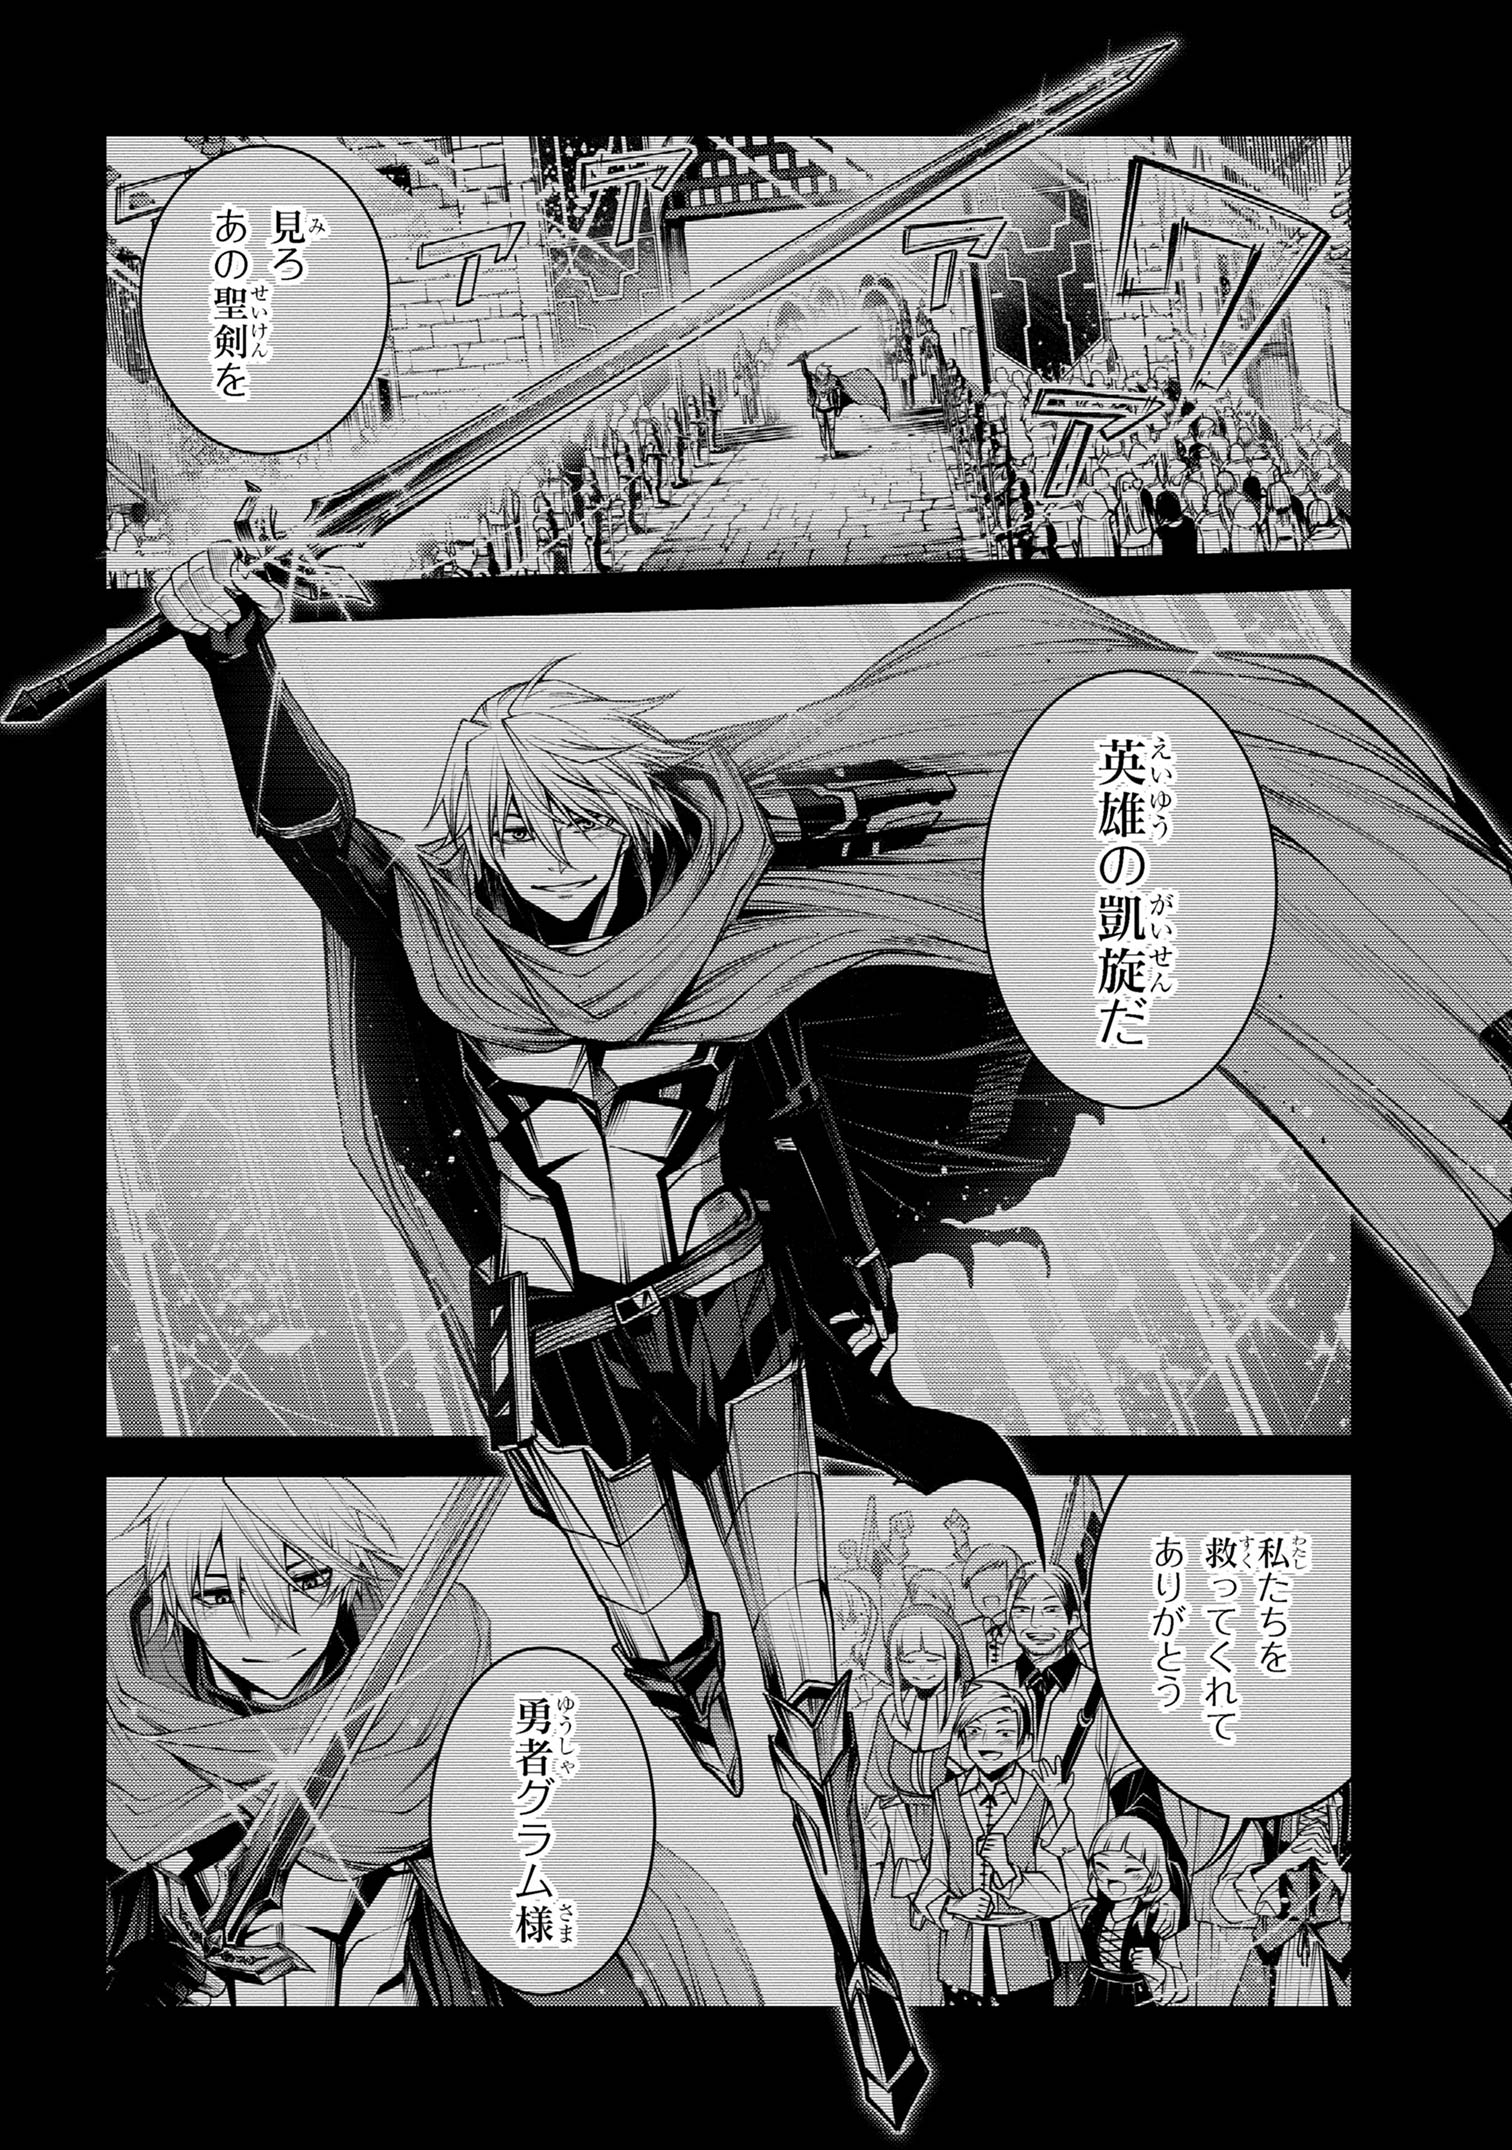 Maou 2099 - Chapter 9.1 - Page 2